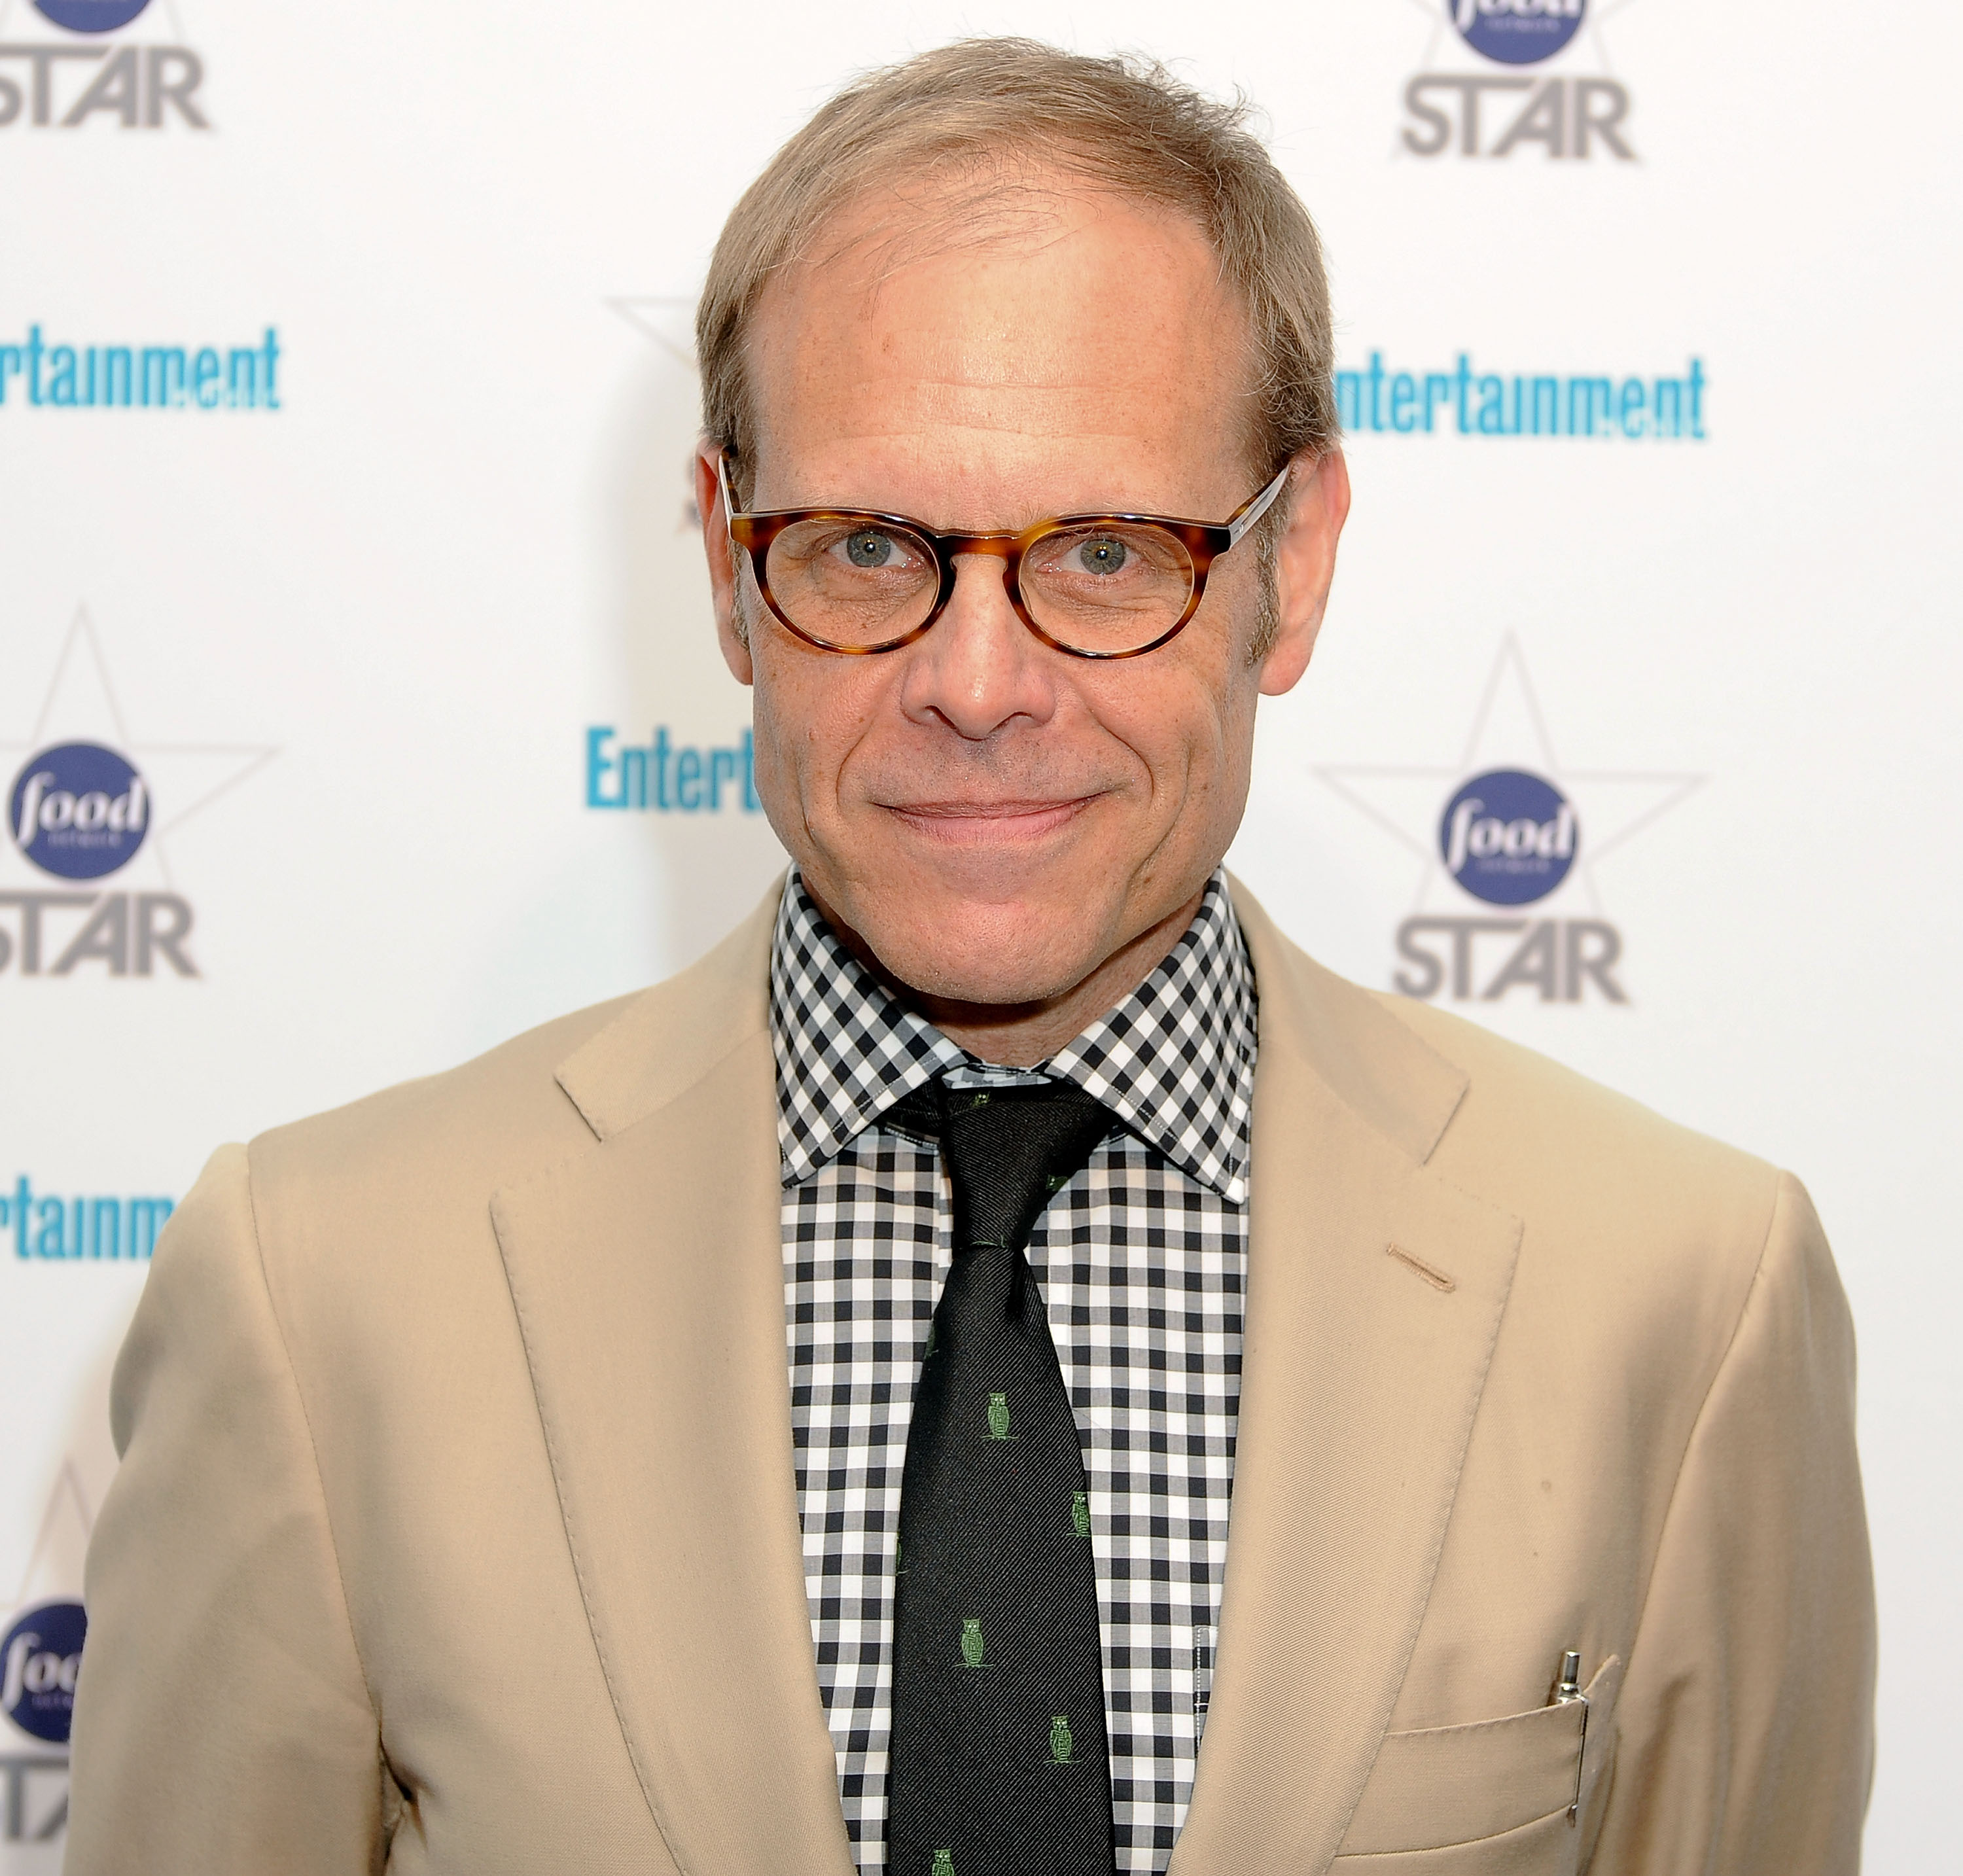 Food Network star Alton Brown wears a beige jacket in this 2012 photo.